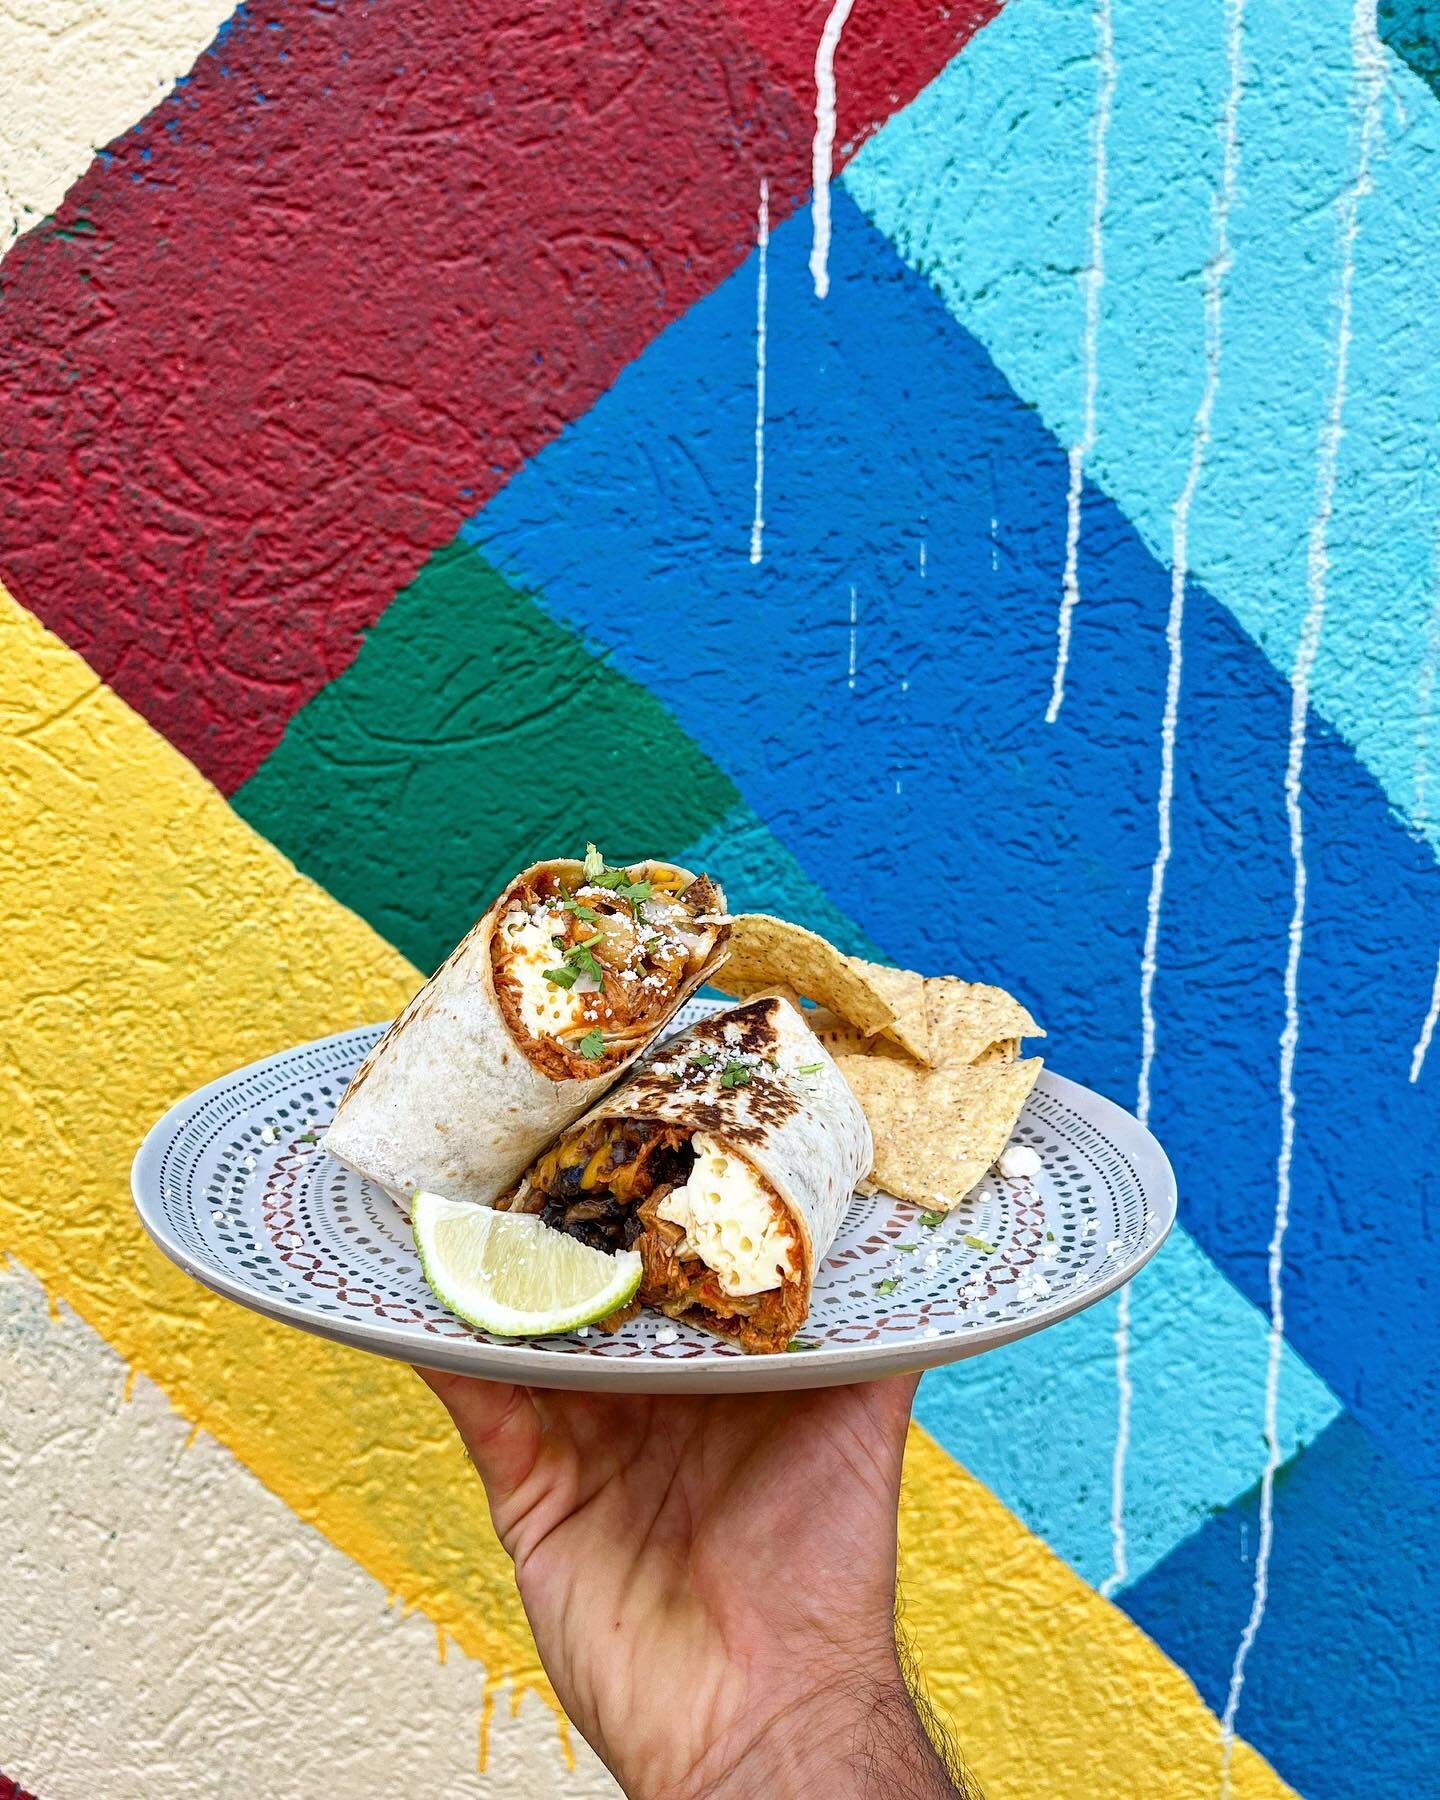 Breakfast burrito for lunch?  Brunch?  Or bring the crew for some carnitas tacos.  We open at 10am Fri, Sat, Sun - 🌮 💃